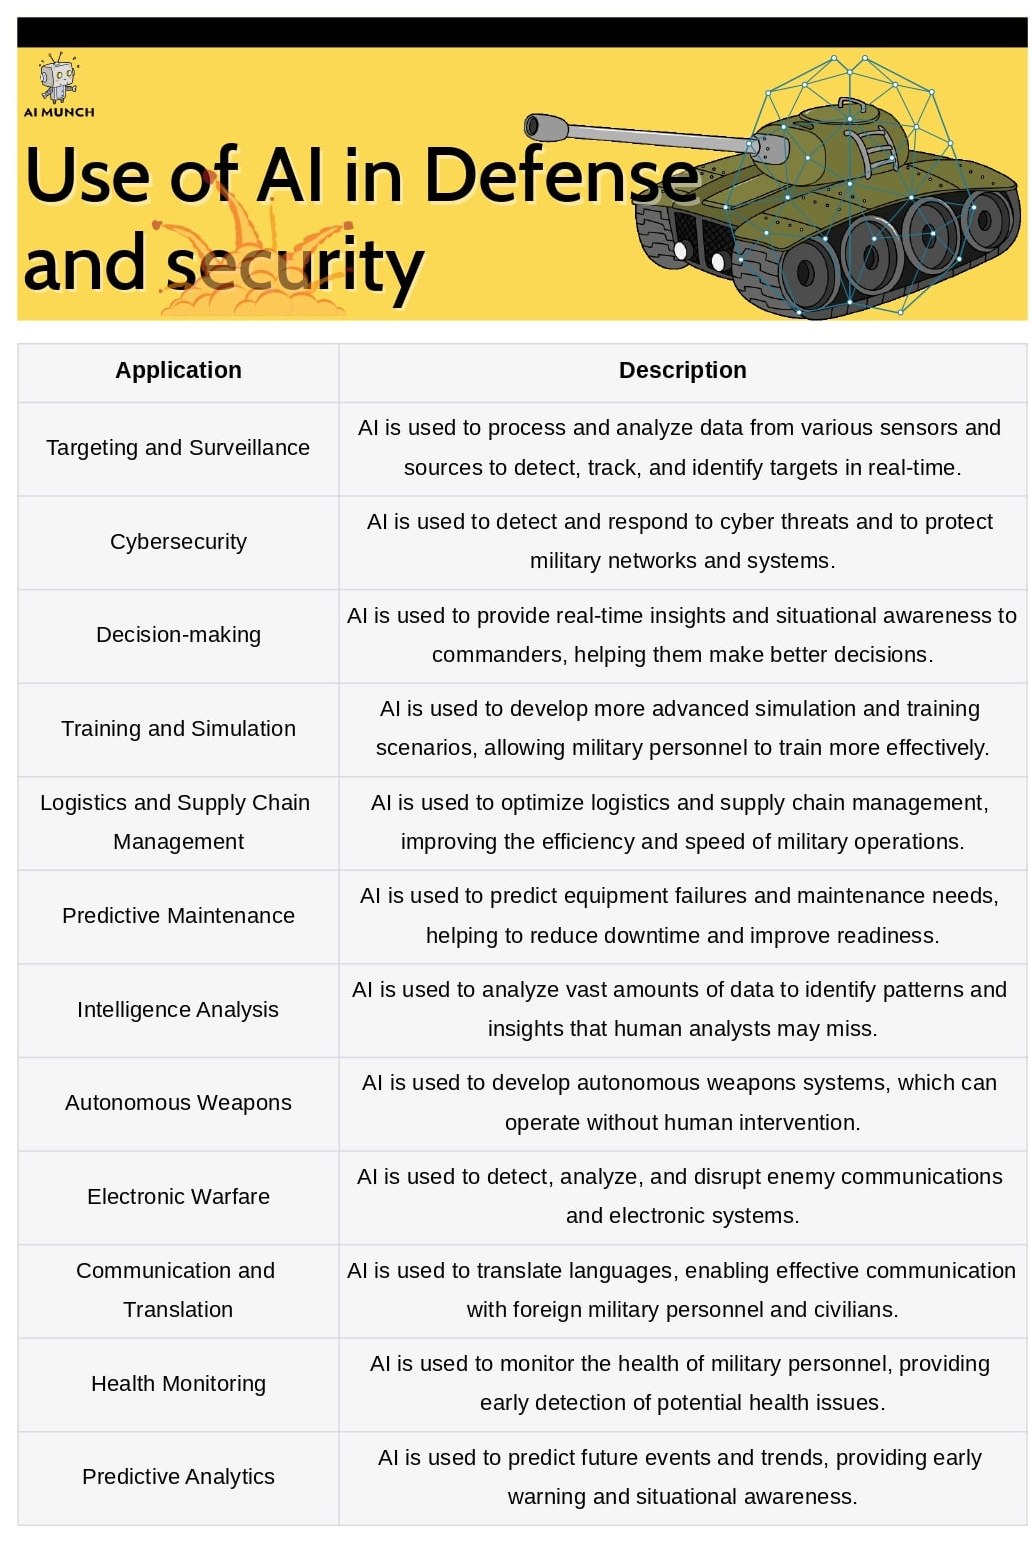 Use of artificial intelligence (AI) in defense and security 